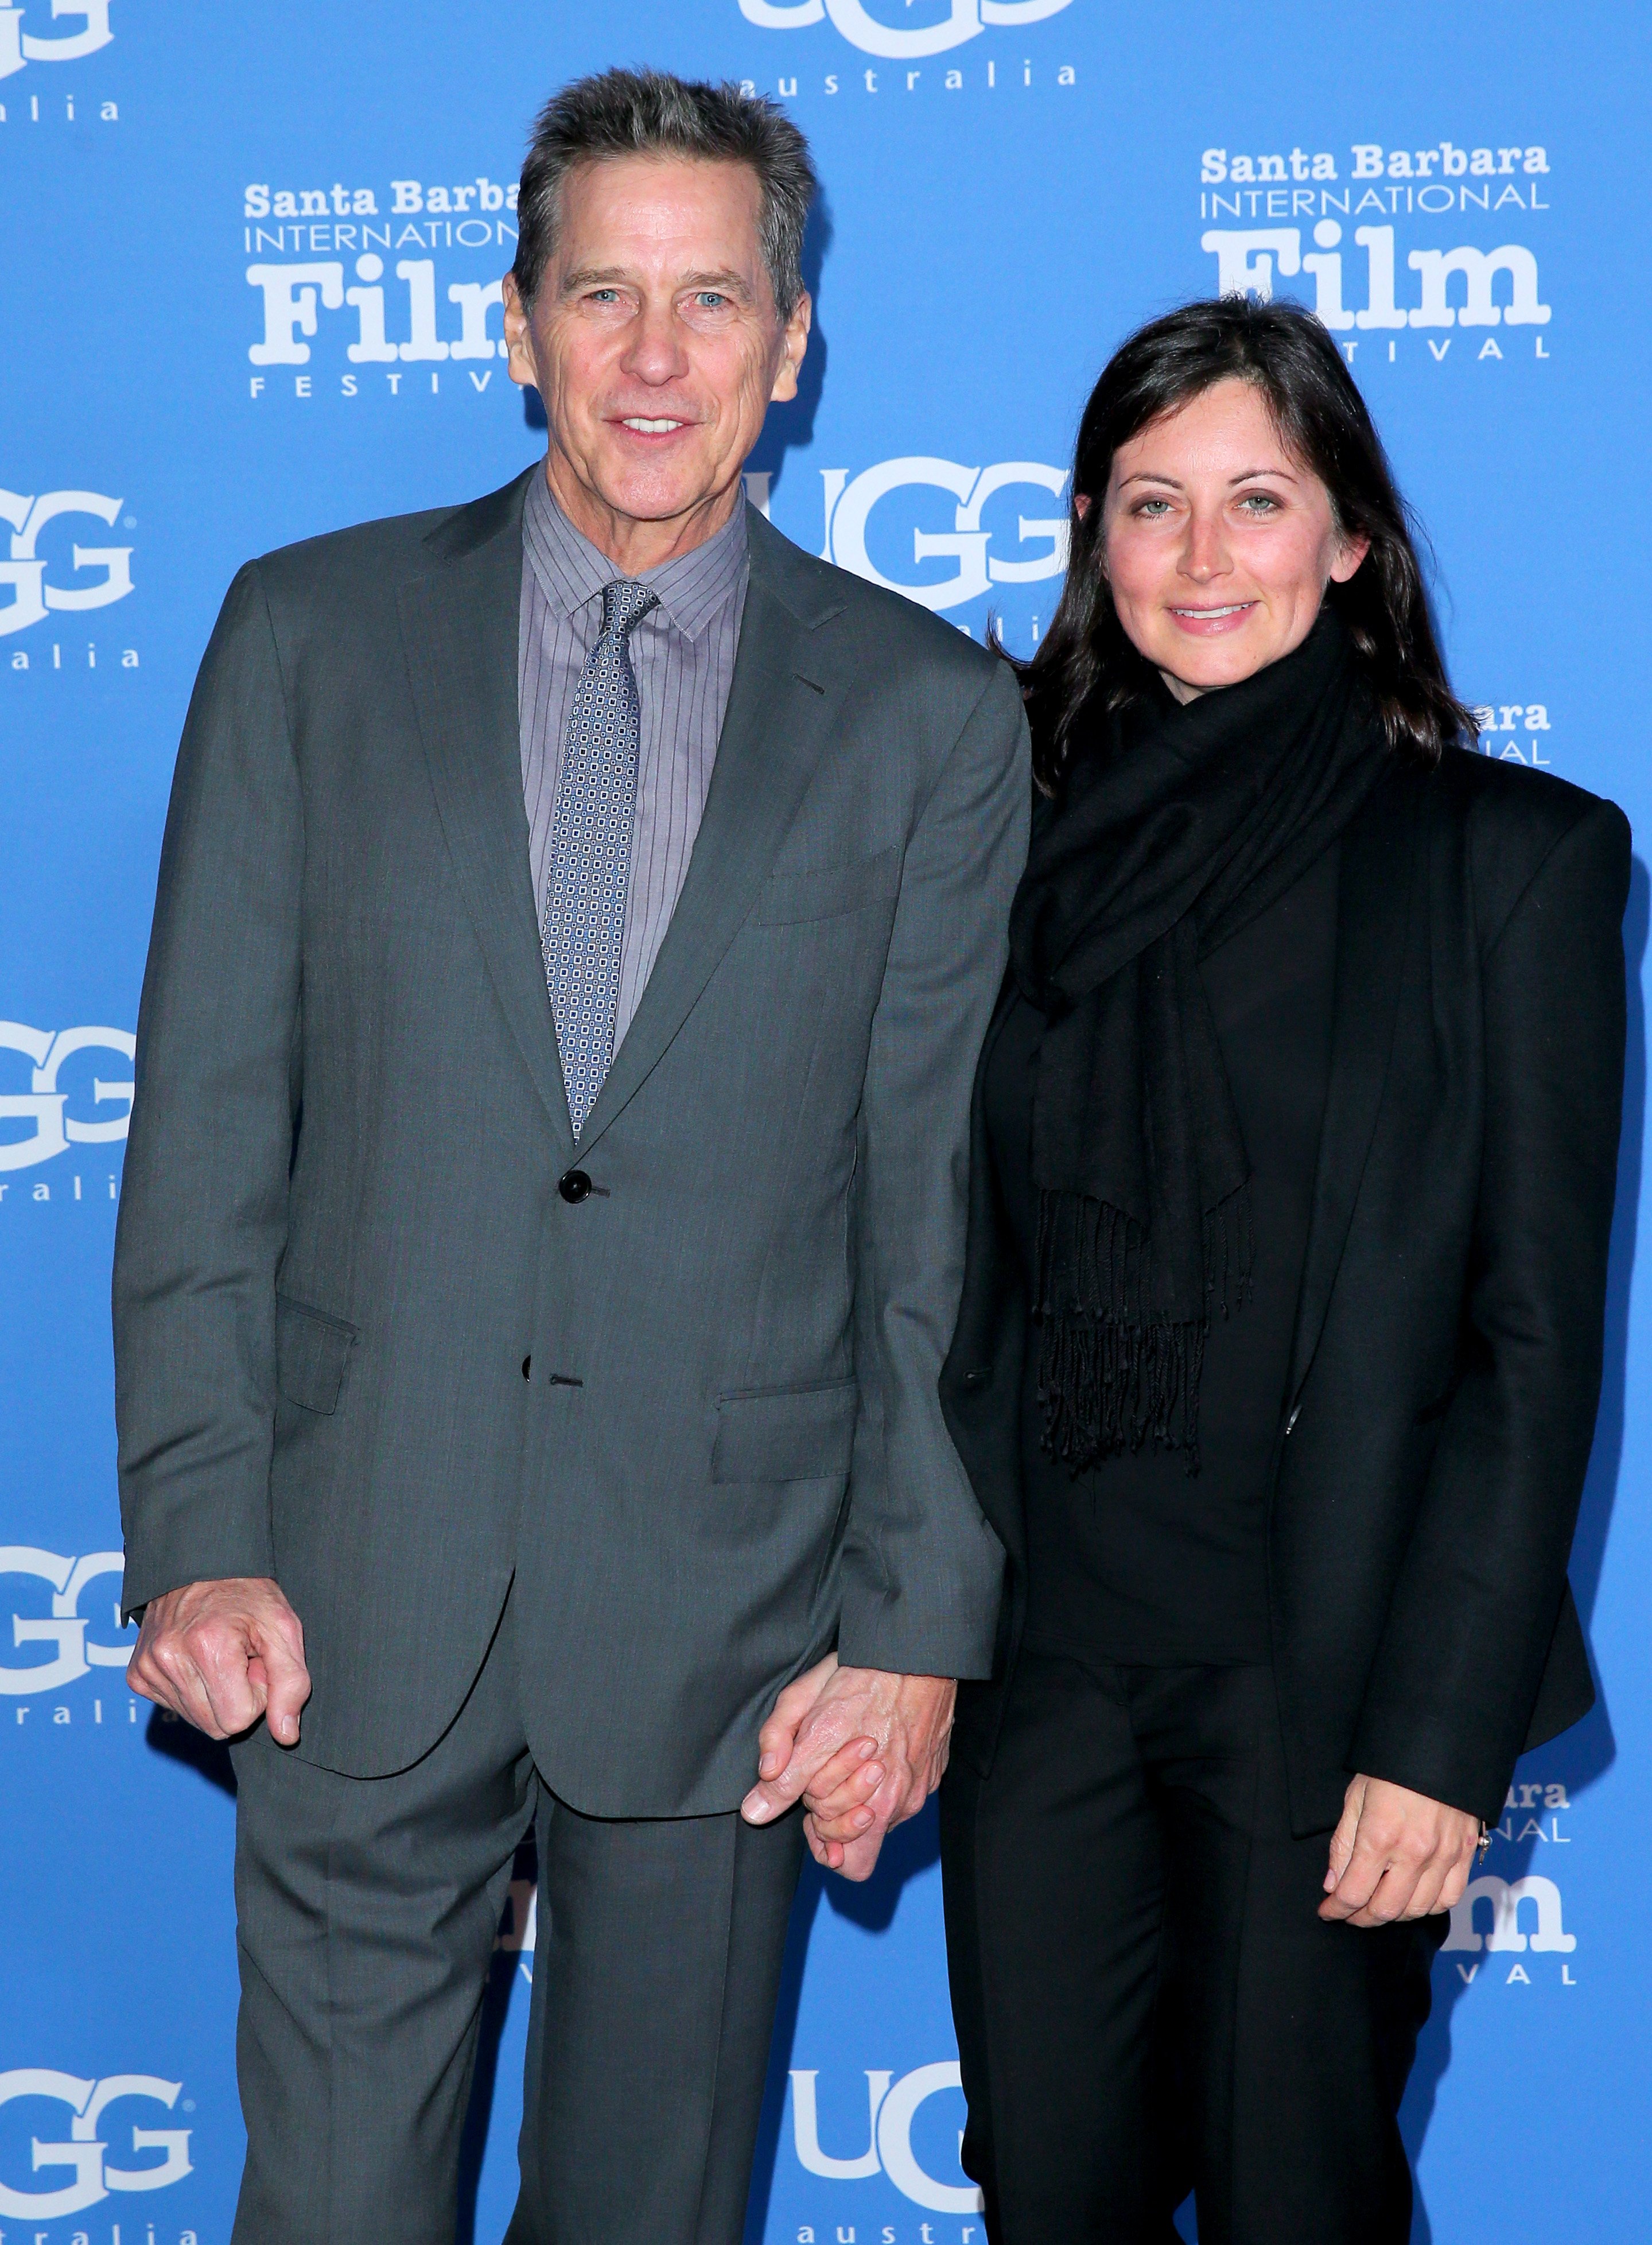 Tim Matheson and Elizabeth Marighetto attend the world premiere screening of "Secret Ocean 3D" at Arlington Theater on January 28, 2015, in Santa Barbara, California | Source: Getty Images